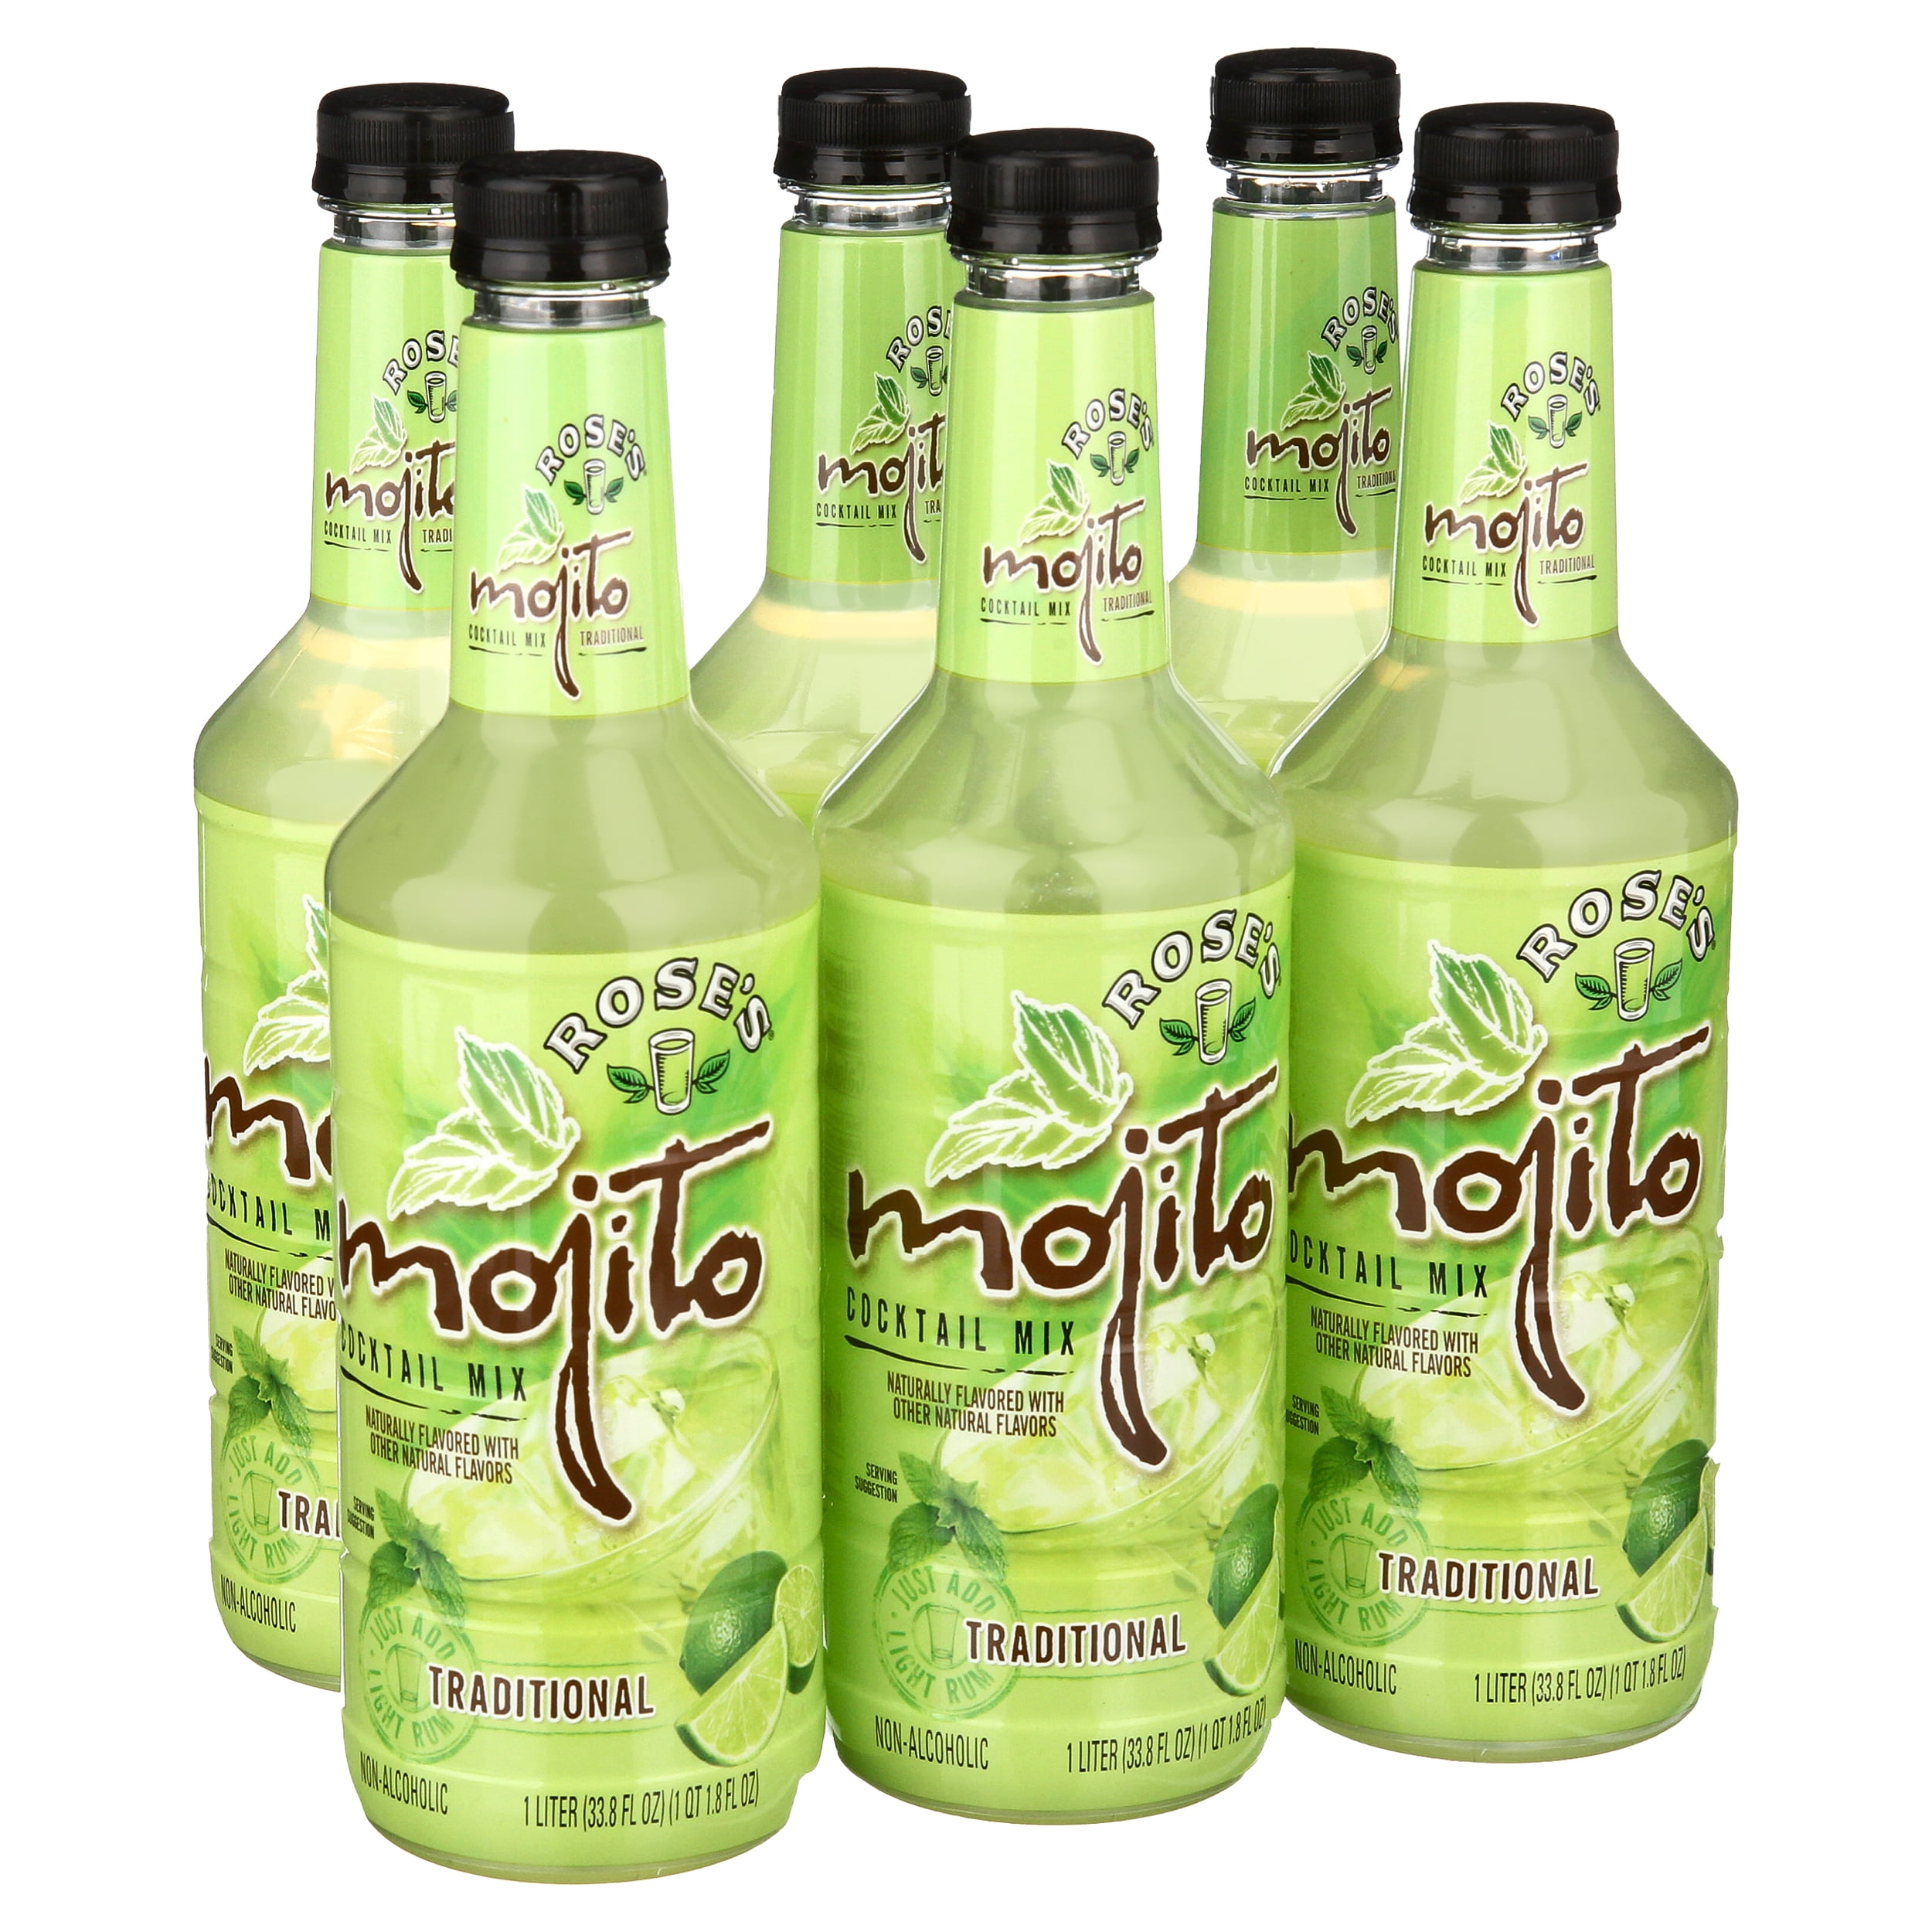 Traditional Mojito Mix, 1 L 1 Count (Pack of 6)